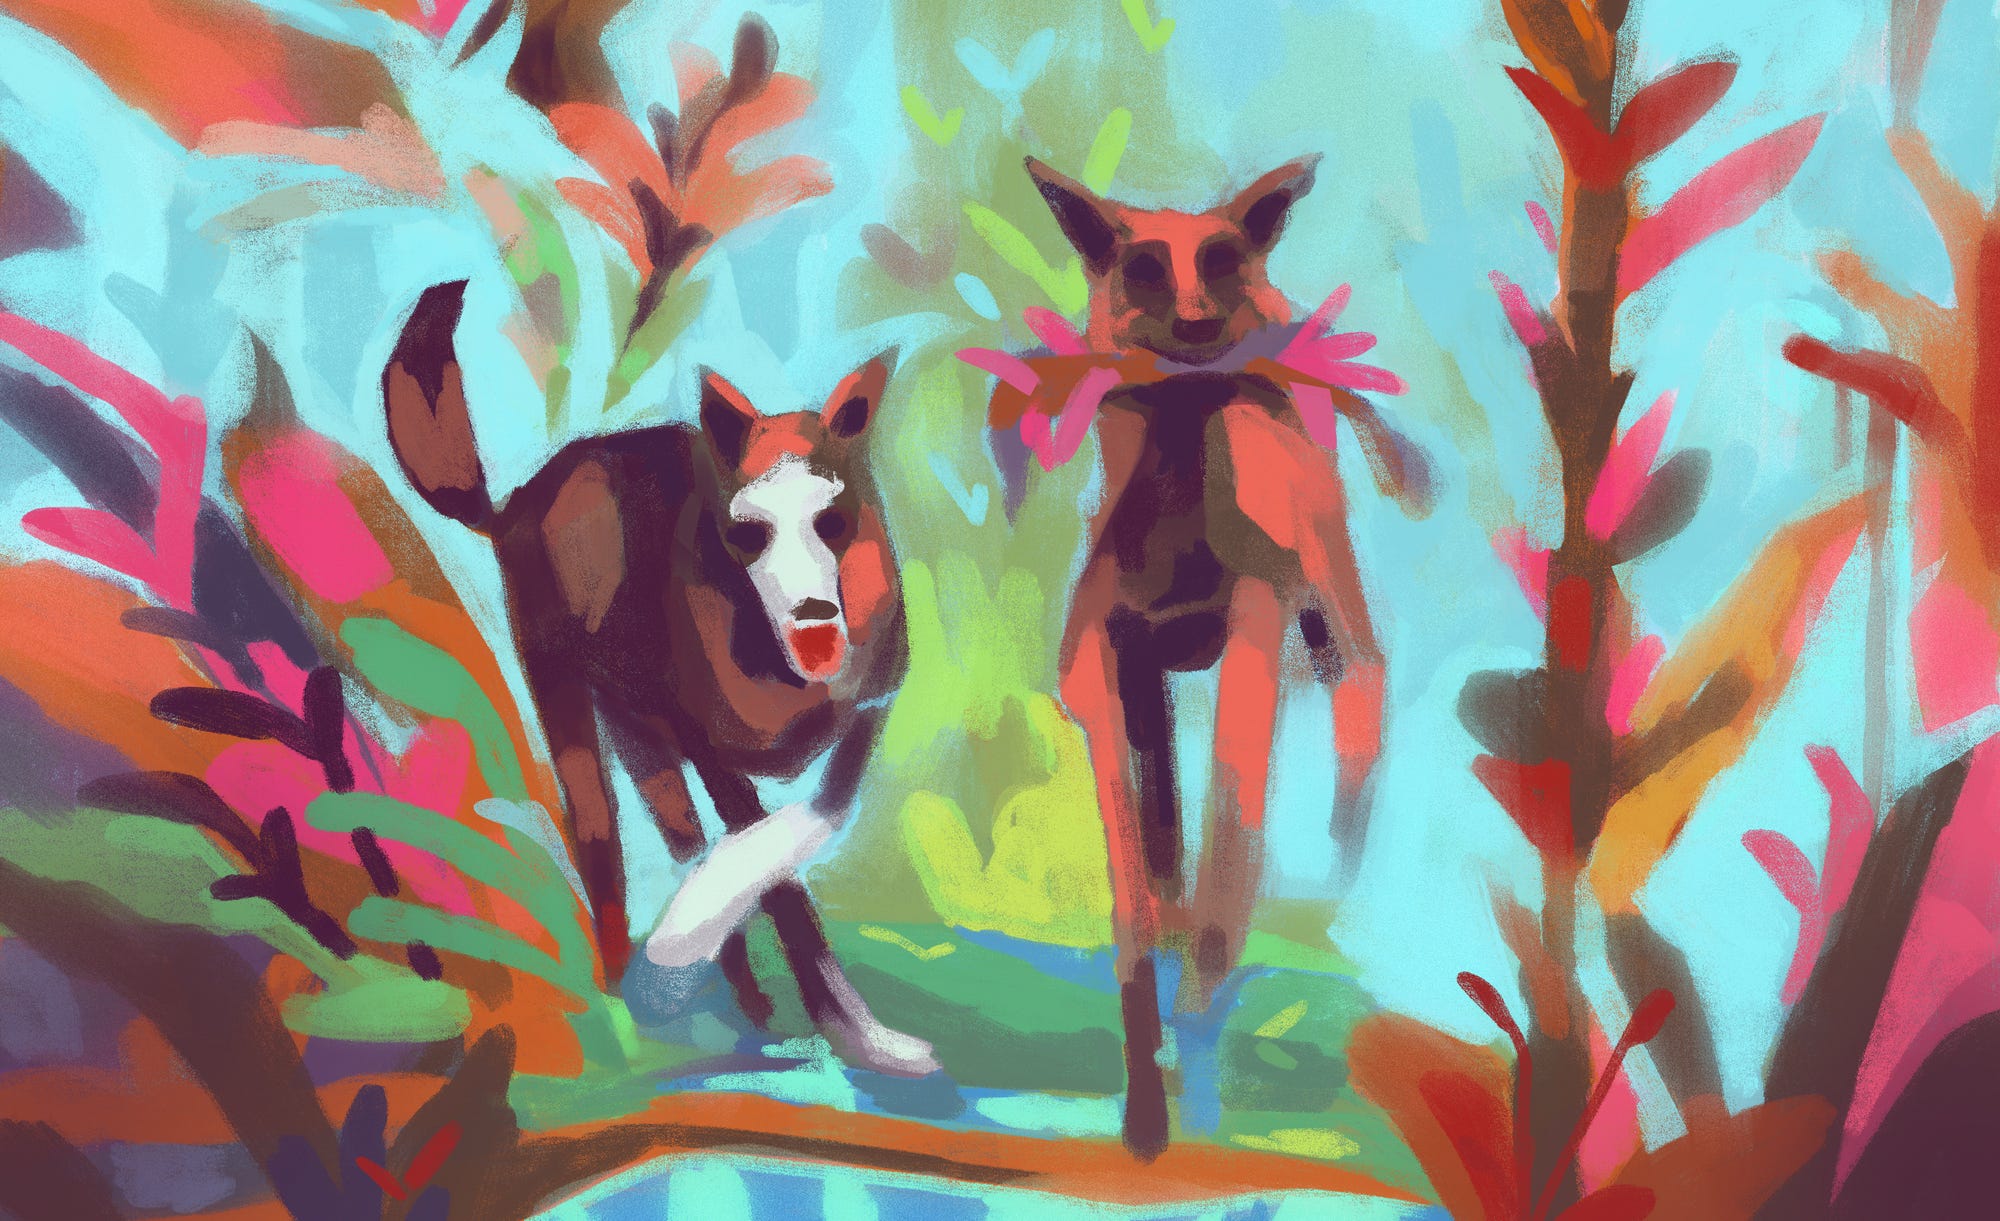 Illustrations of two spirit dogs in colorful abstract forest